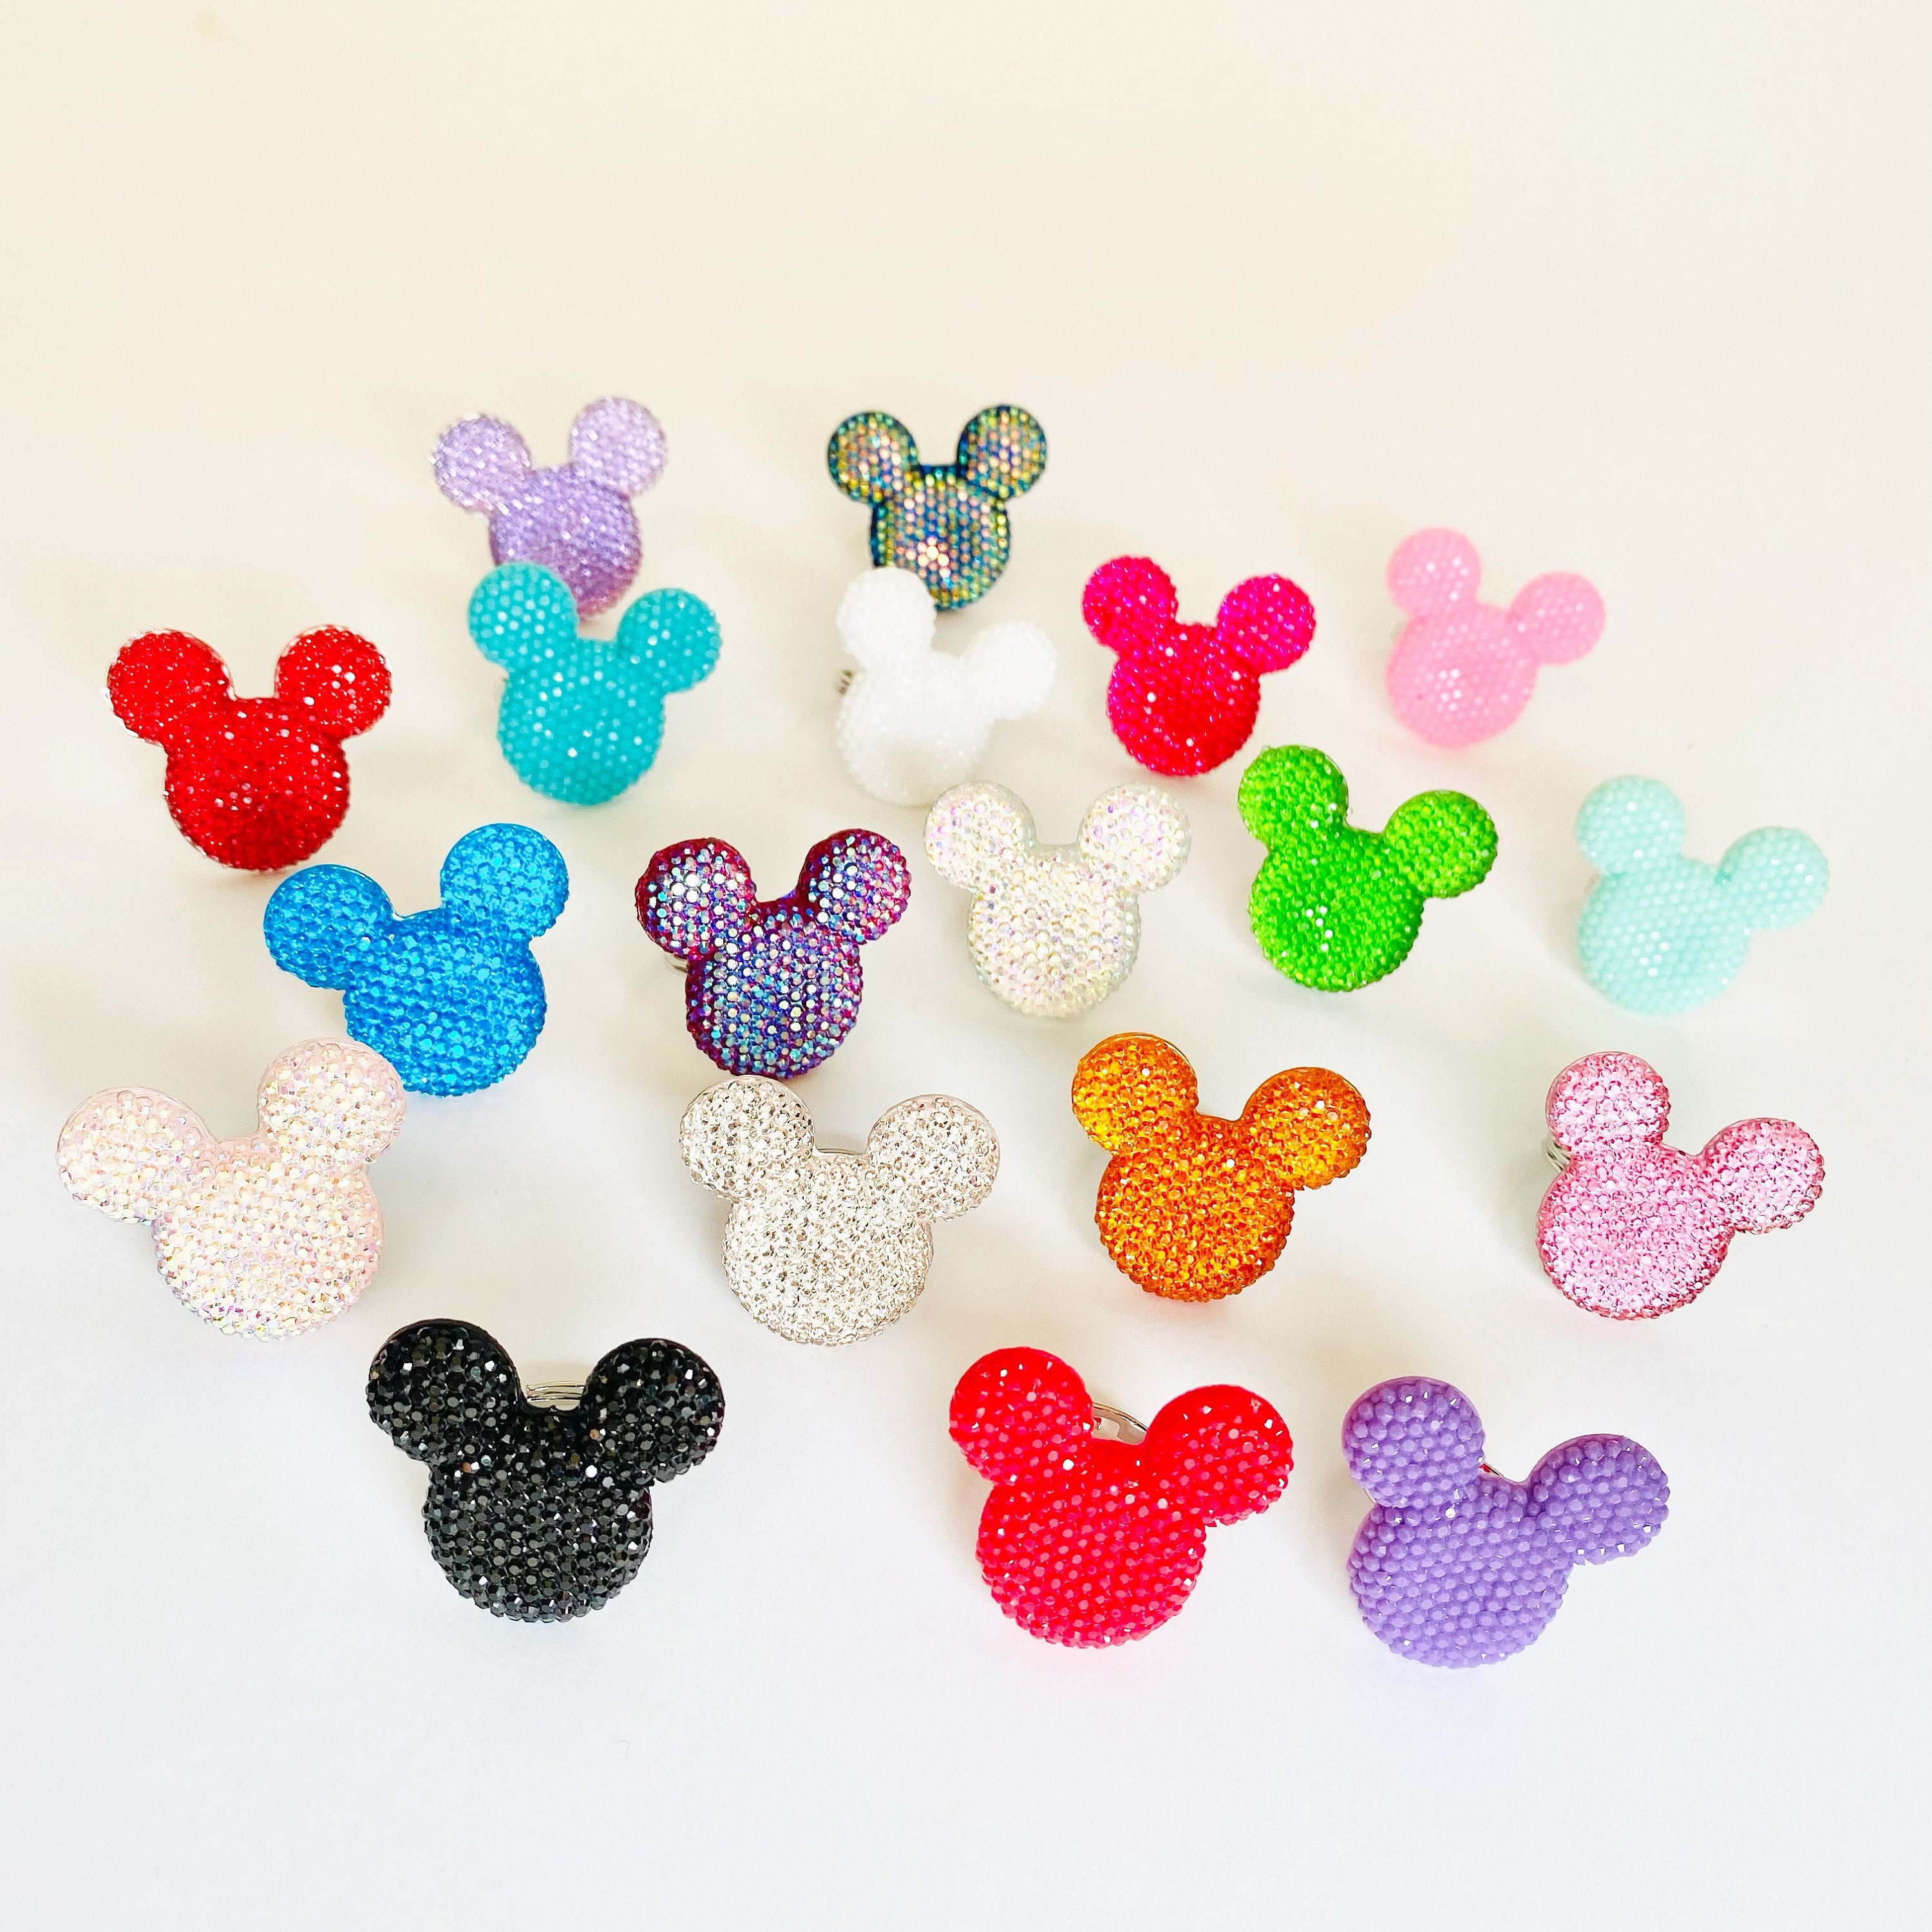 Tiny Iridescent Mickey Mouse Beads for Bracelet, Disneyland, Disney World  Beads for Jewelry Making, Shiny Disney Themed Beads for Cosplay 